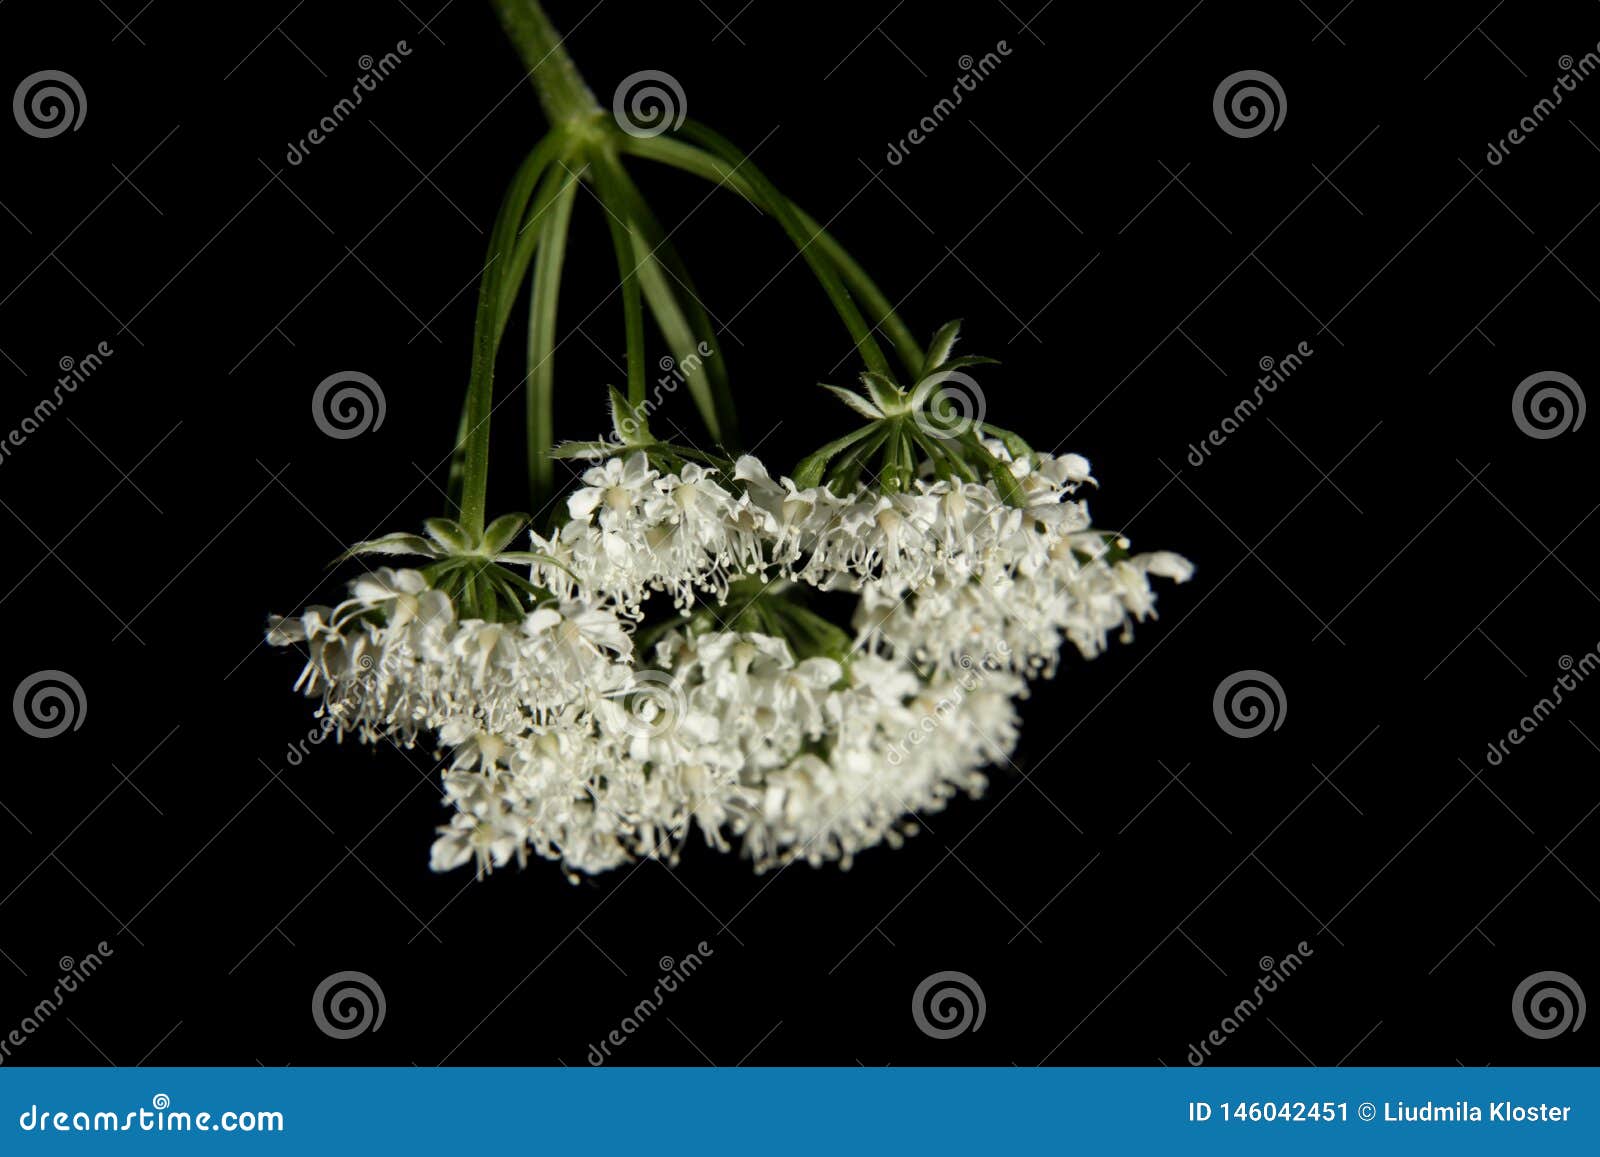 inconspicuous wild flower with small white flowers